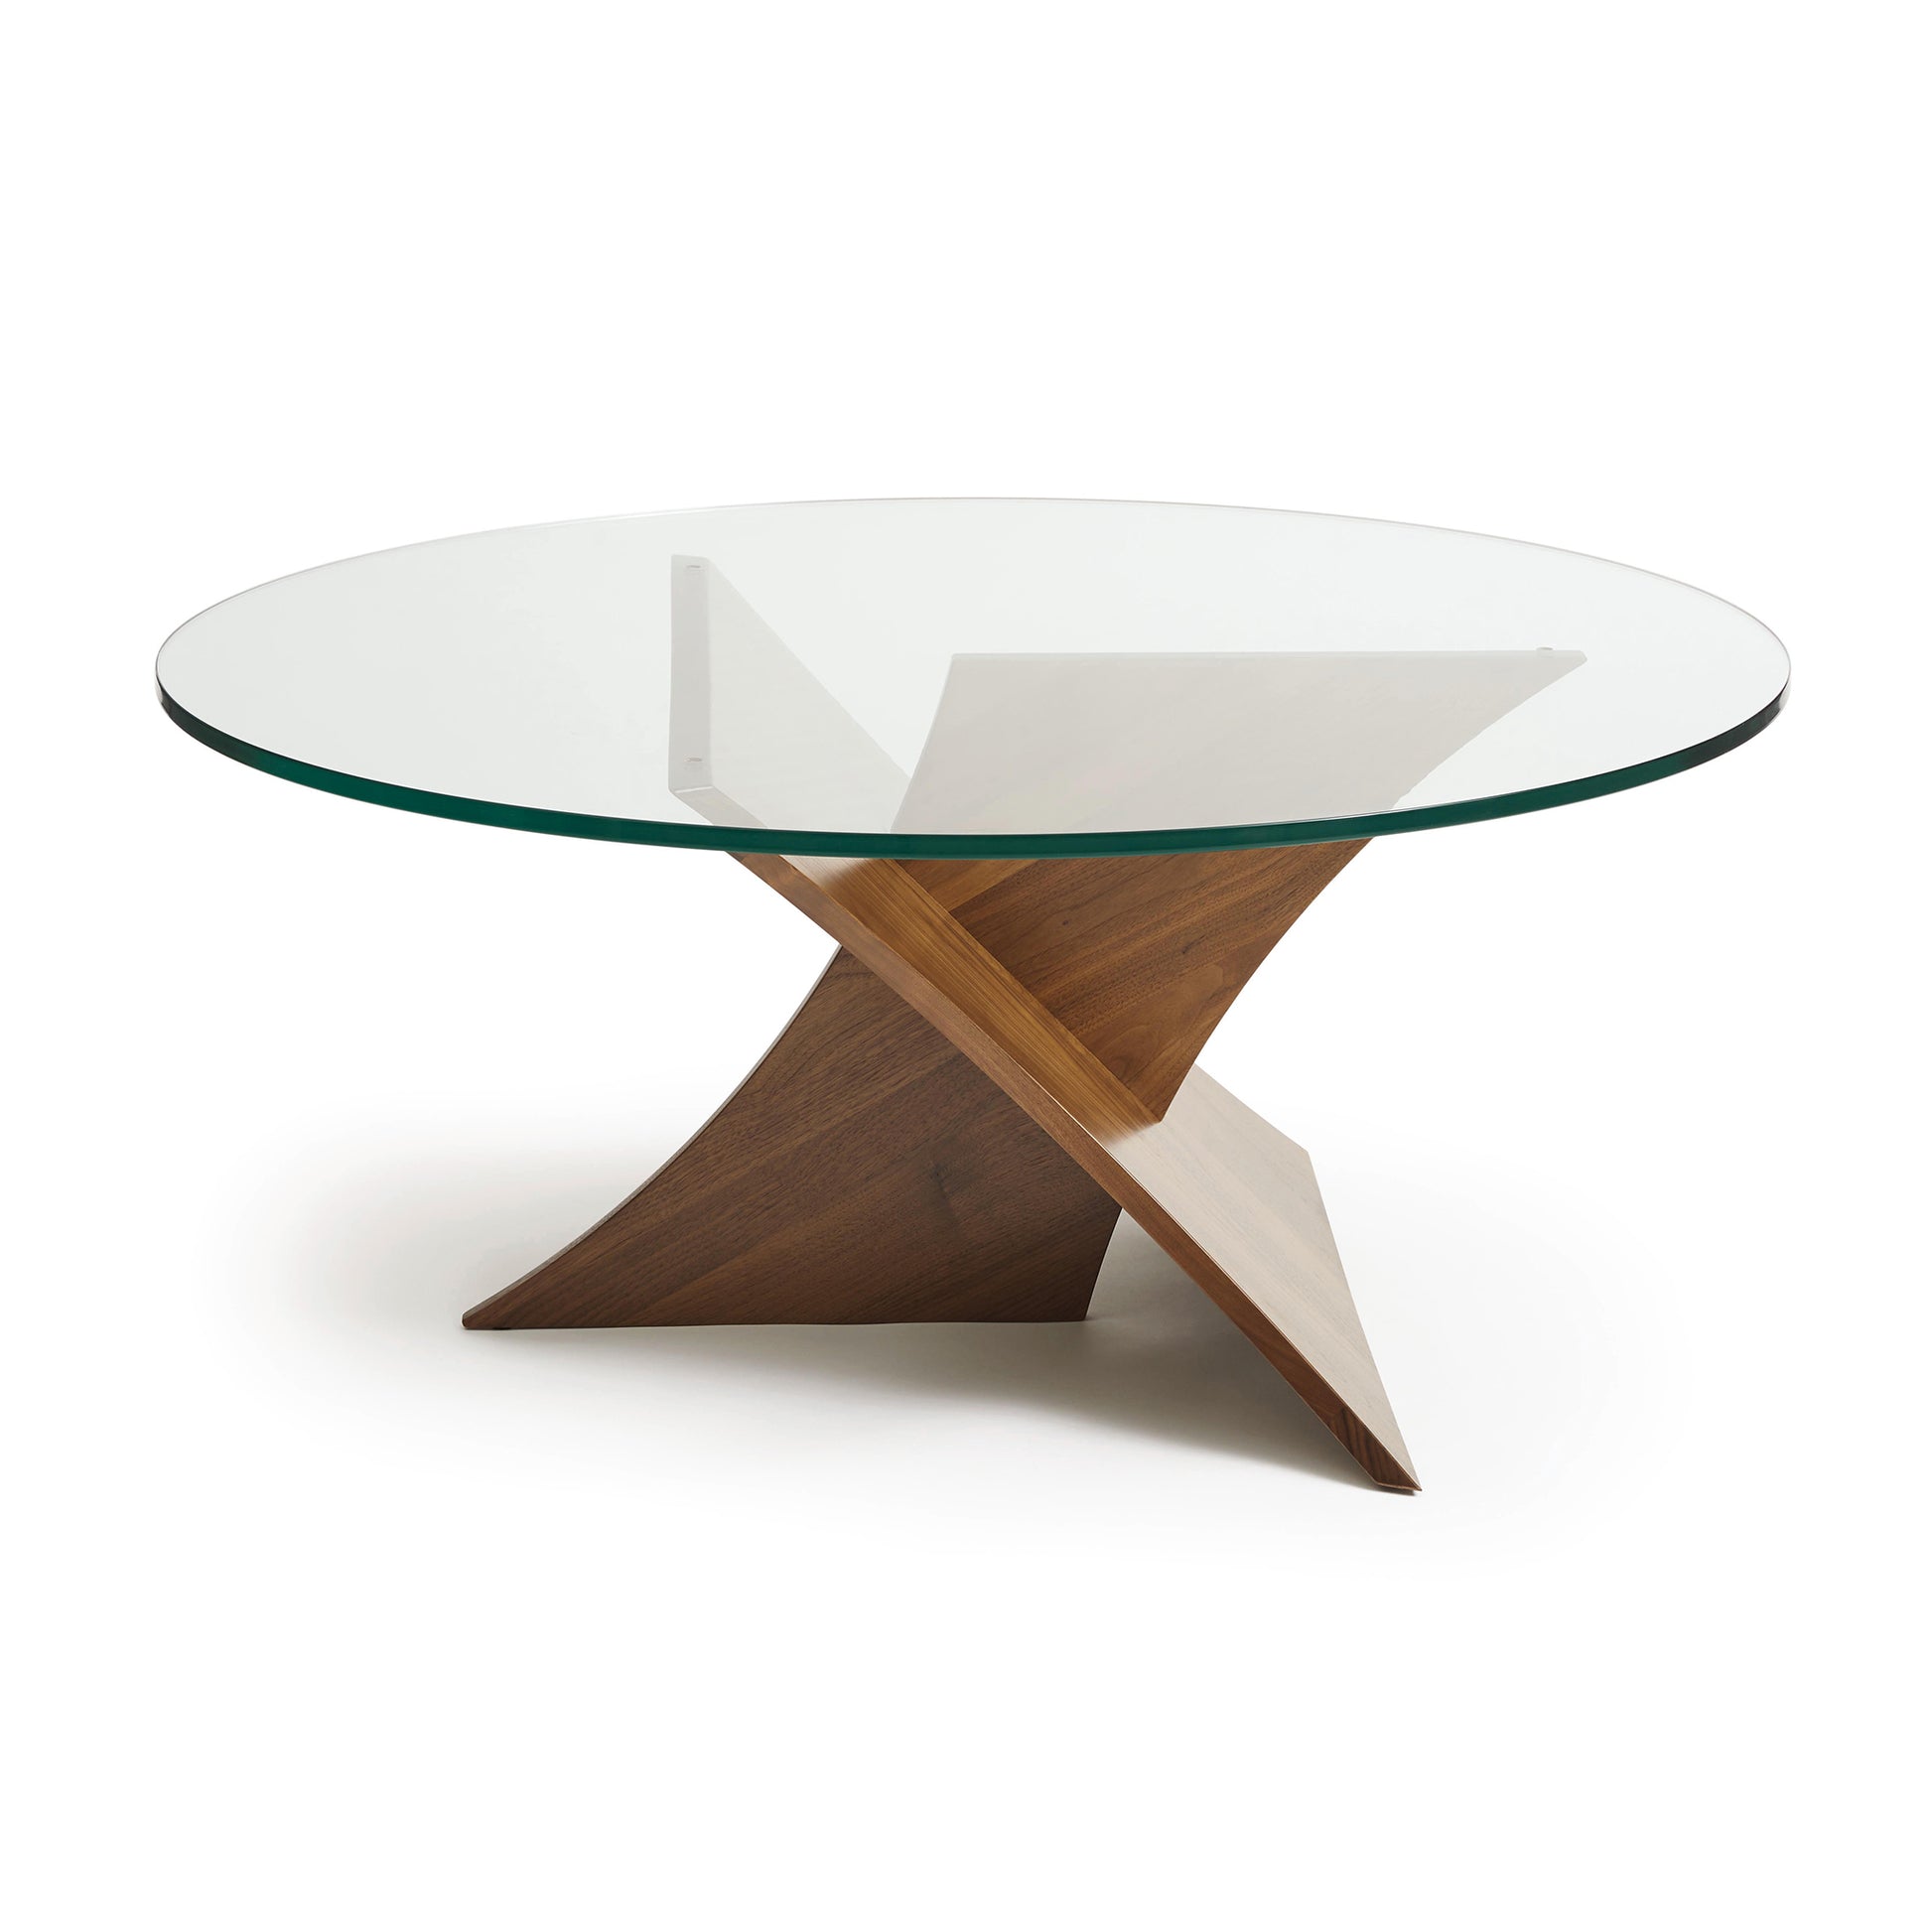 A modern Copeland Furniture Planes Round Glass Top Coffee Table with a walnut base featuring intersecting supports and a tempered glass top on a white background.